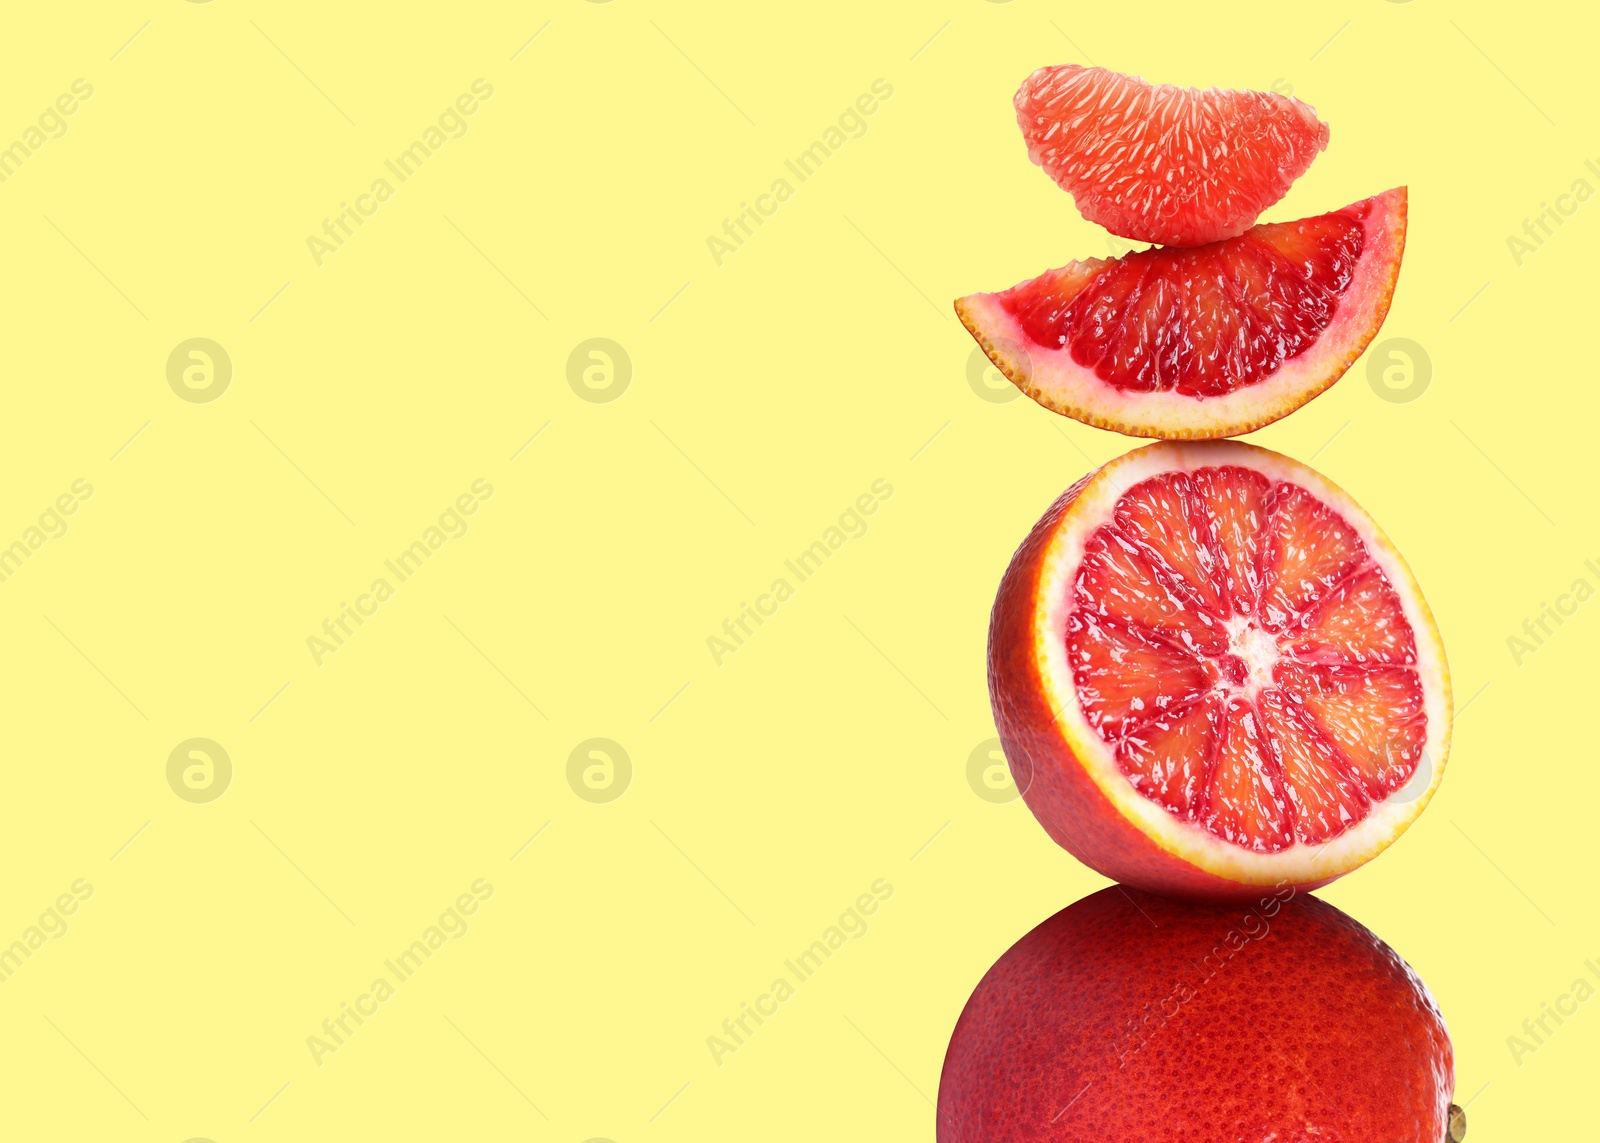 Image of Stacked cut and whole red oranges on pale light yellow background, space for text